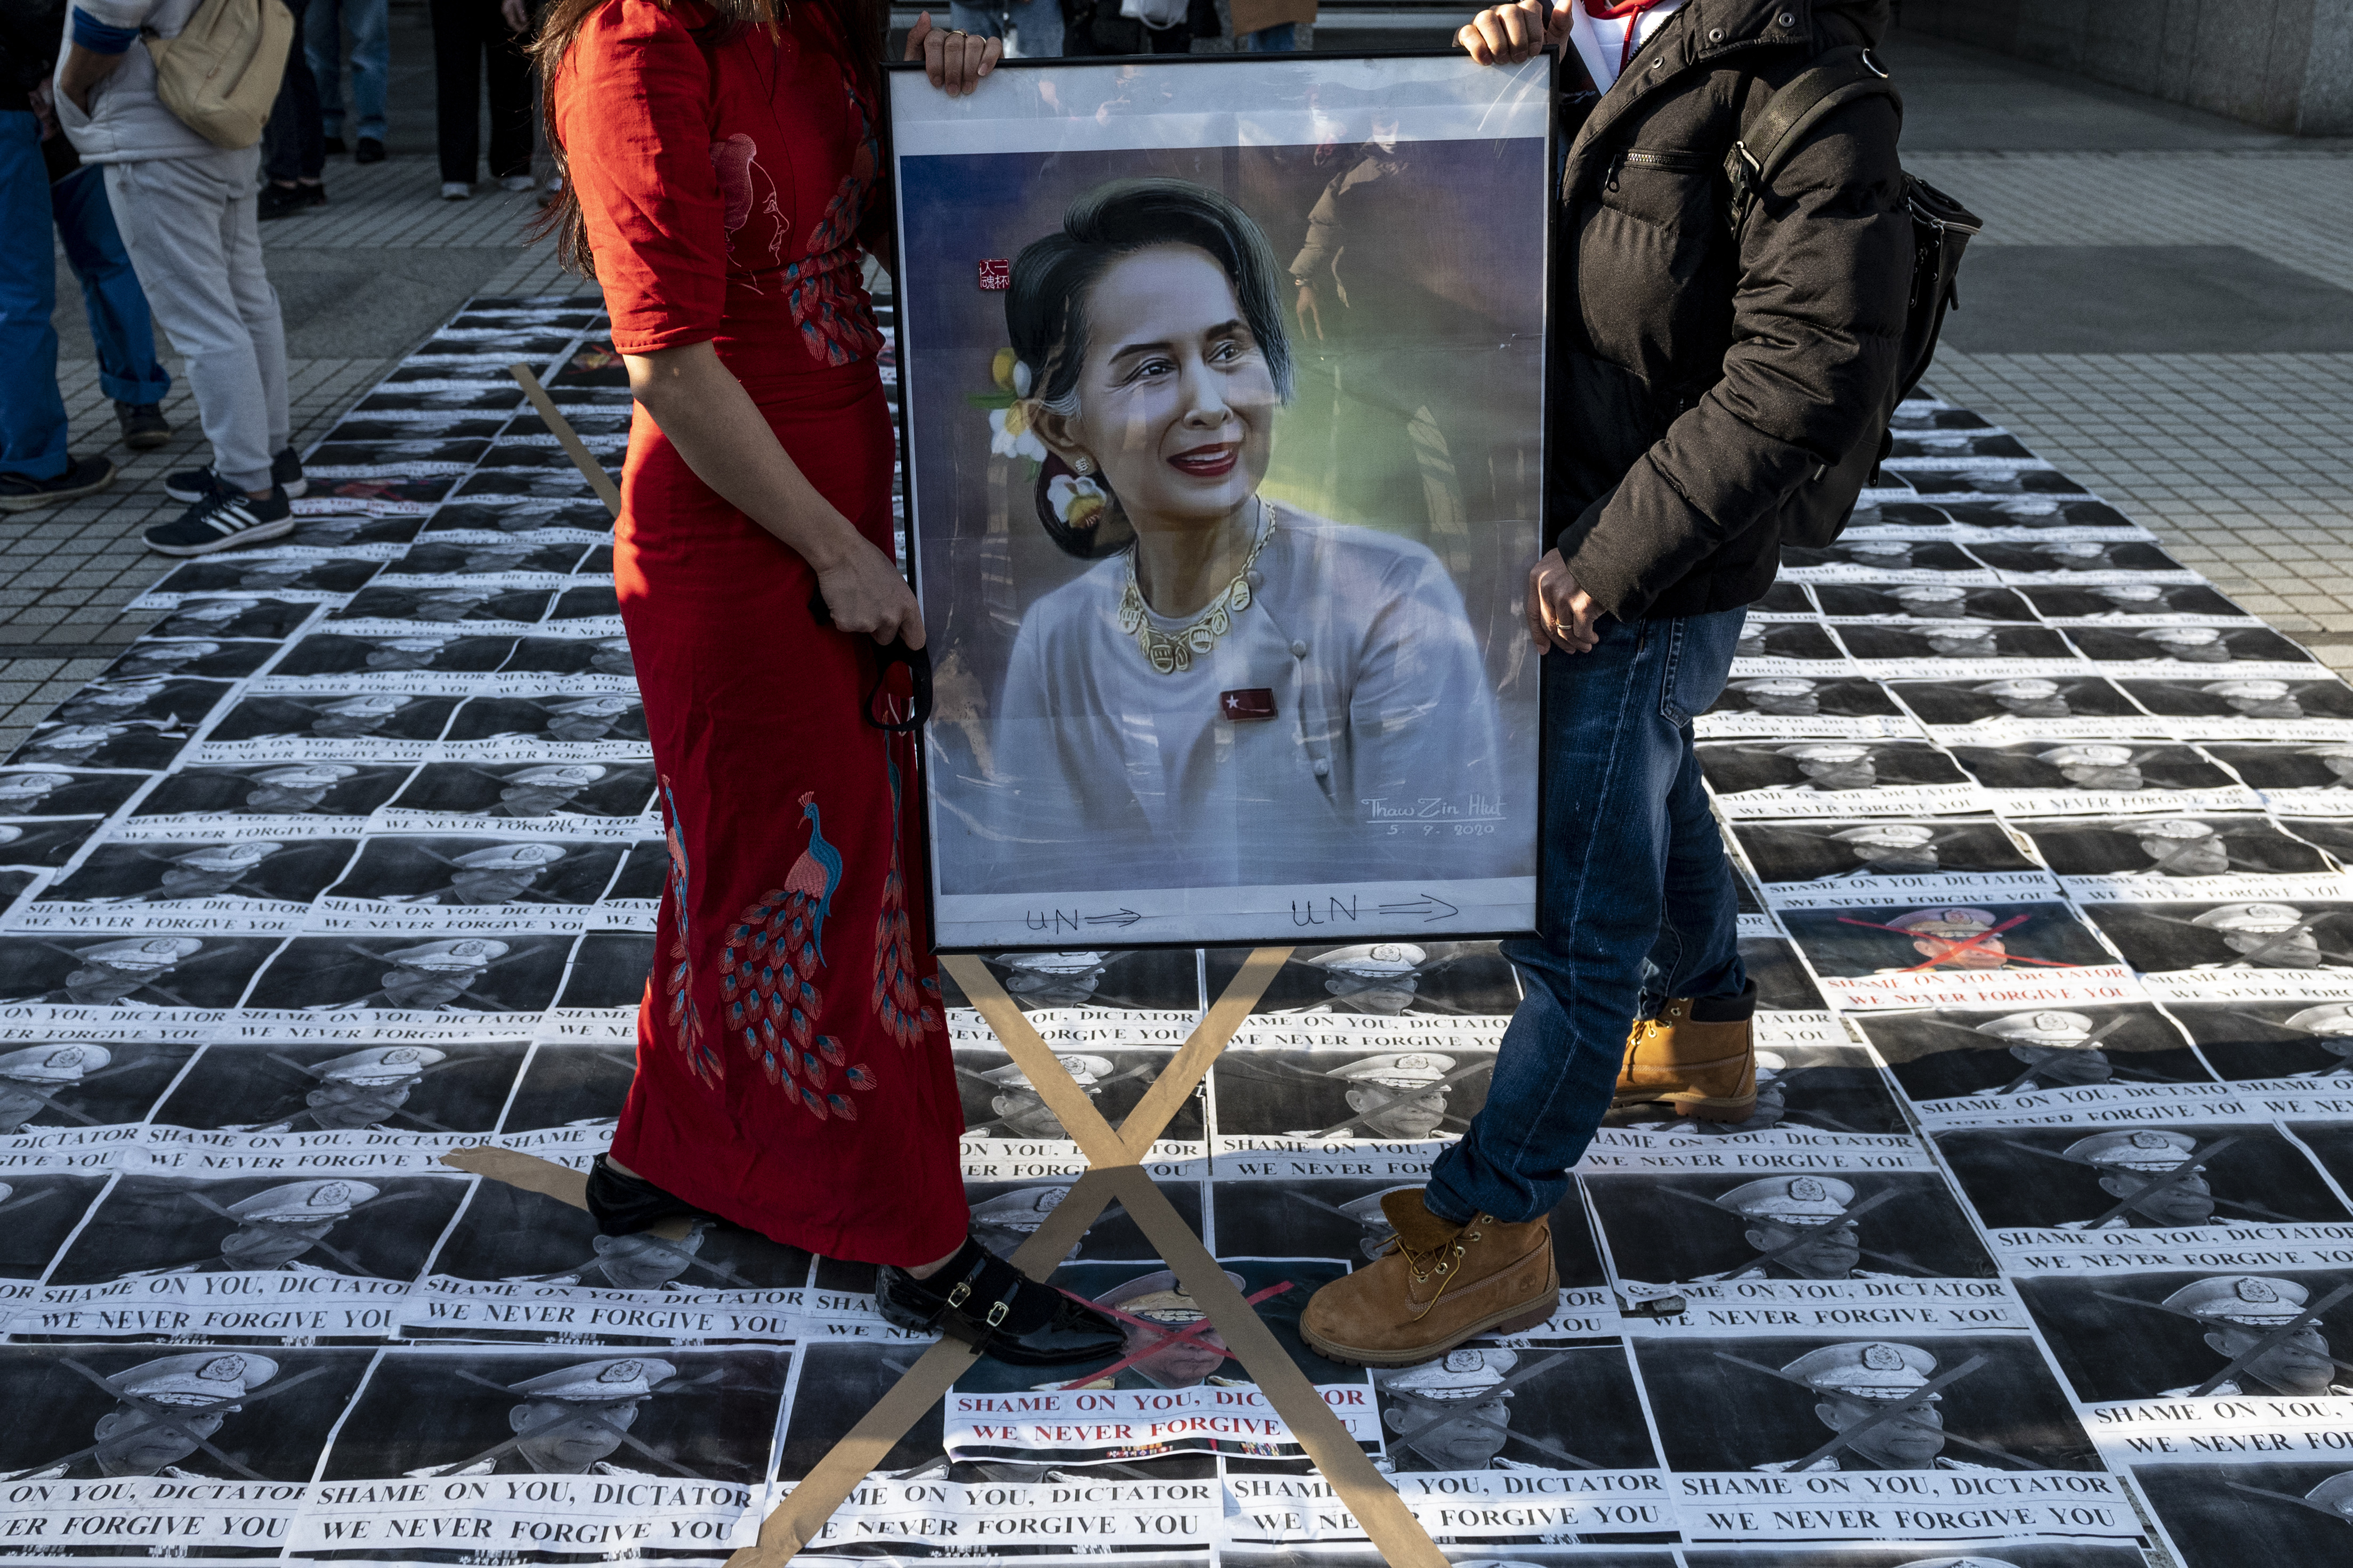 Activists hold a portrait of Myanmar's de facto leader Aung San Suu Kyi while standing on portraits of the country's military general Min Aung Hlaing during a protest outside the United Nations University building in Tokyo on Feb. 1, 2021, after Myanmar's military seized power in a bloodless coup and detaining democratically elected leader Aung San Suu Kyi as it imposed a one-year state of emergency. PHOTO: Philip FONG / AFP